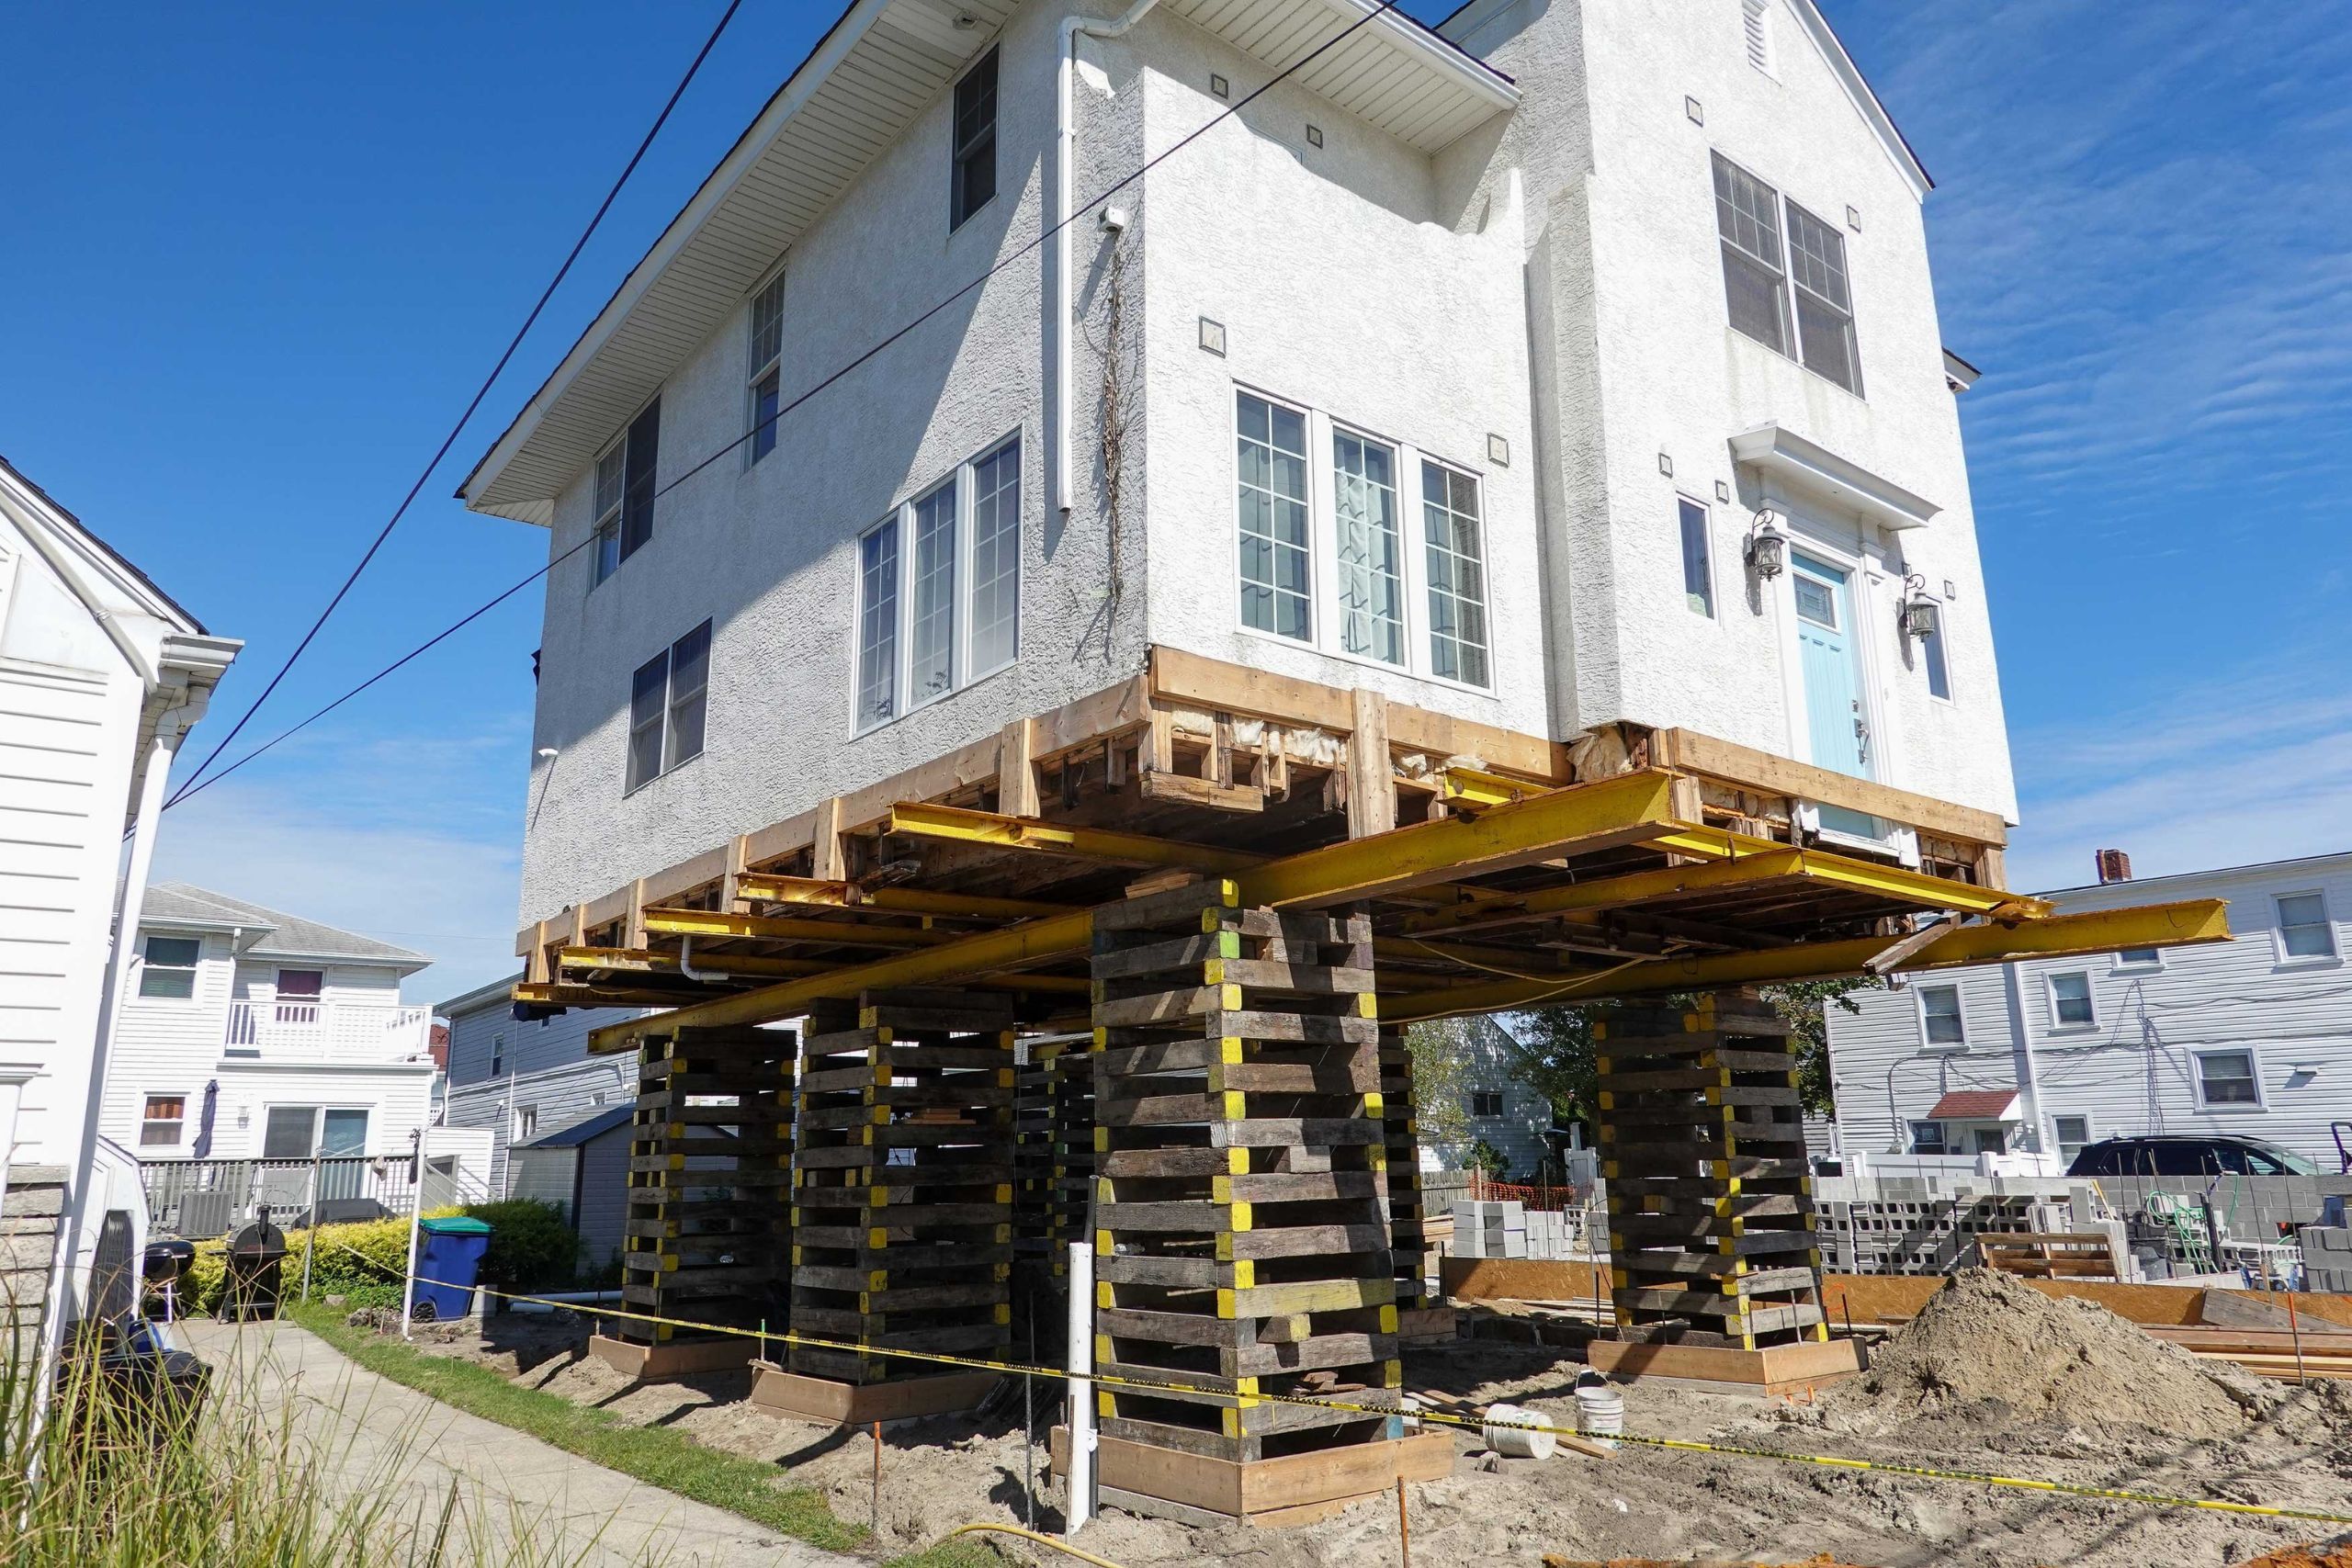 Located in Corpus Christi, Texas, we are a company that specializes in house lifting, small distance house moving, piles and foundations.